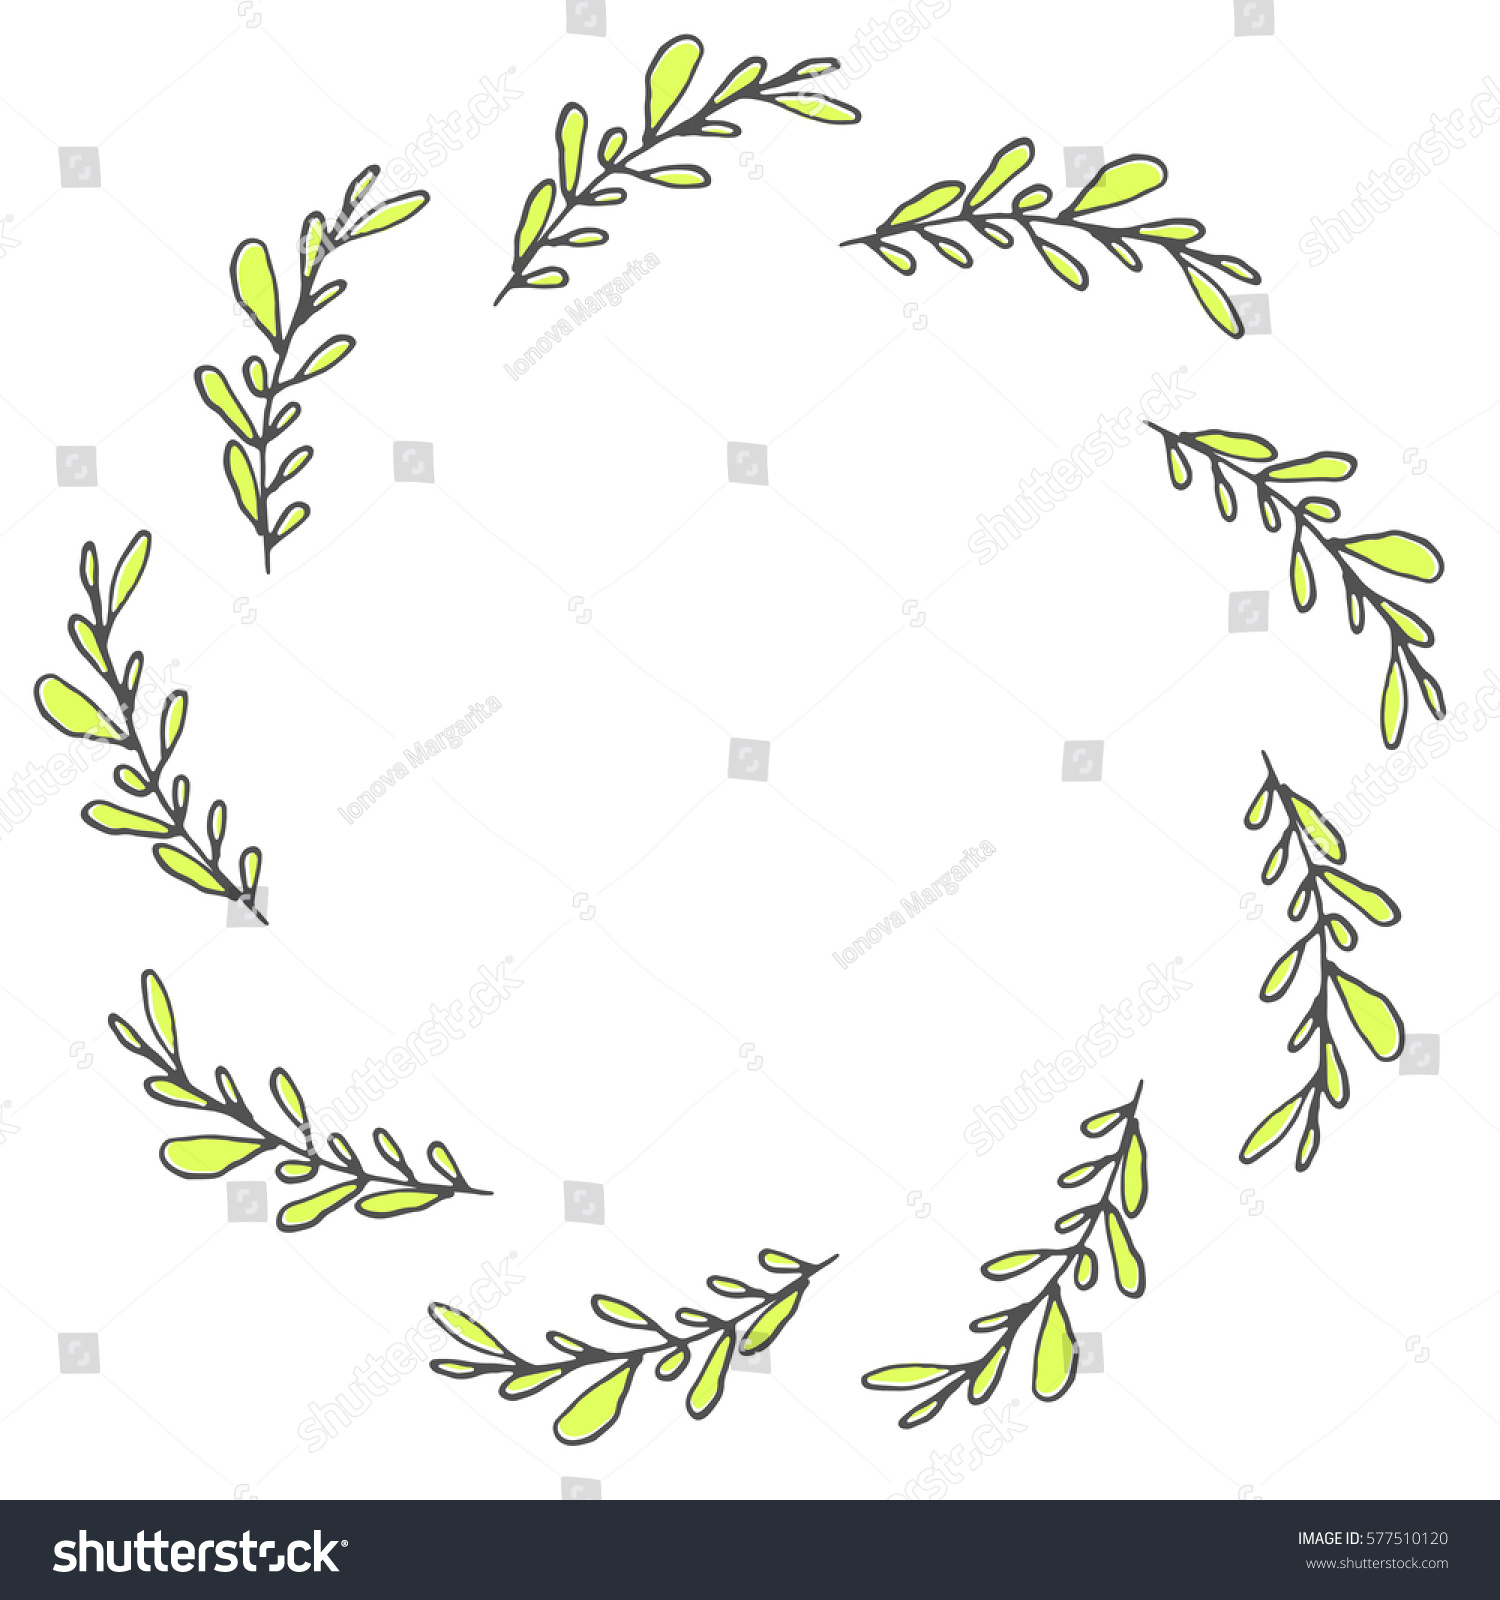 Hand Drawn Wreath Made Vector Leaves Stock Vector Royalty Free 577510120 4032